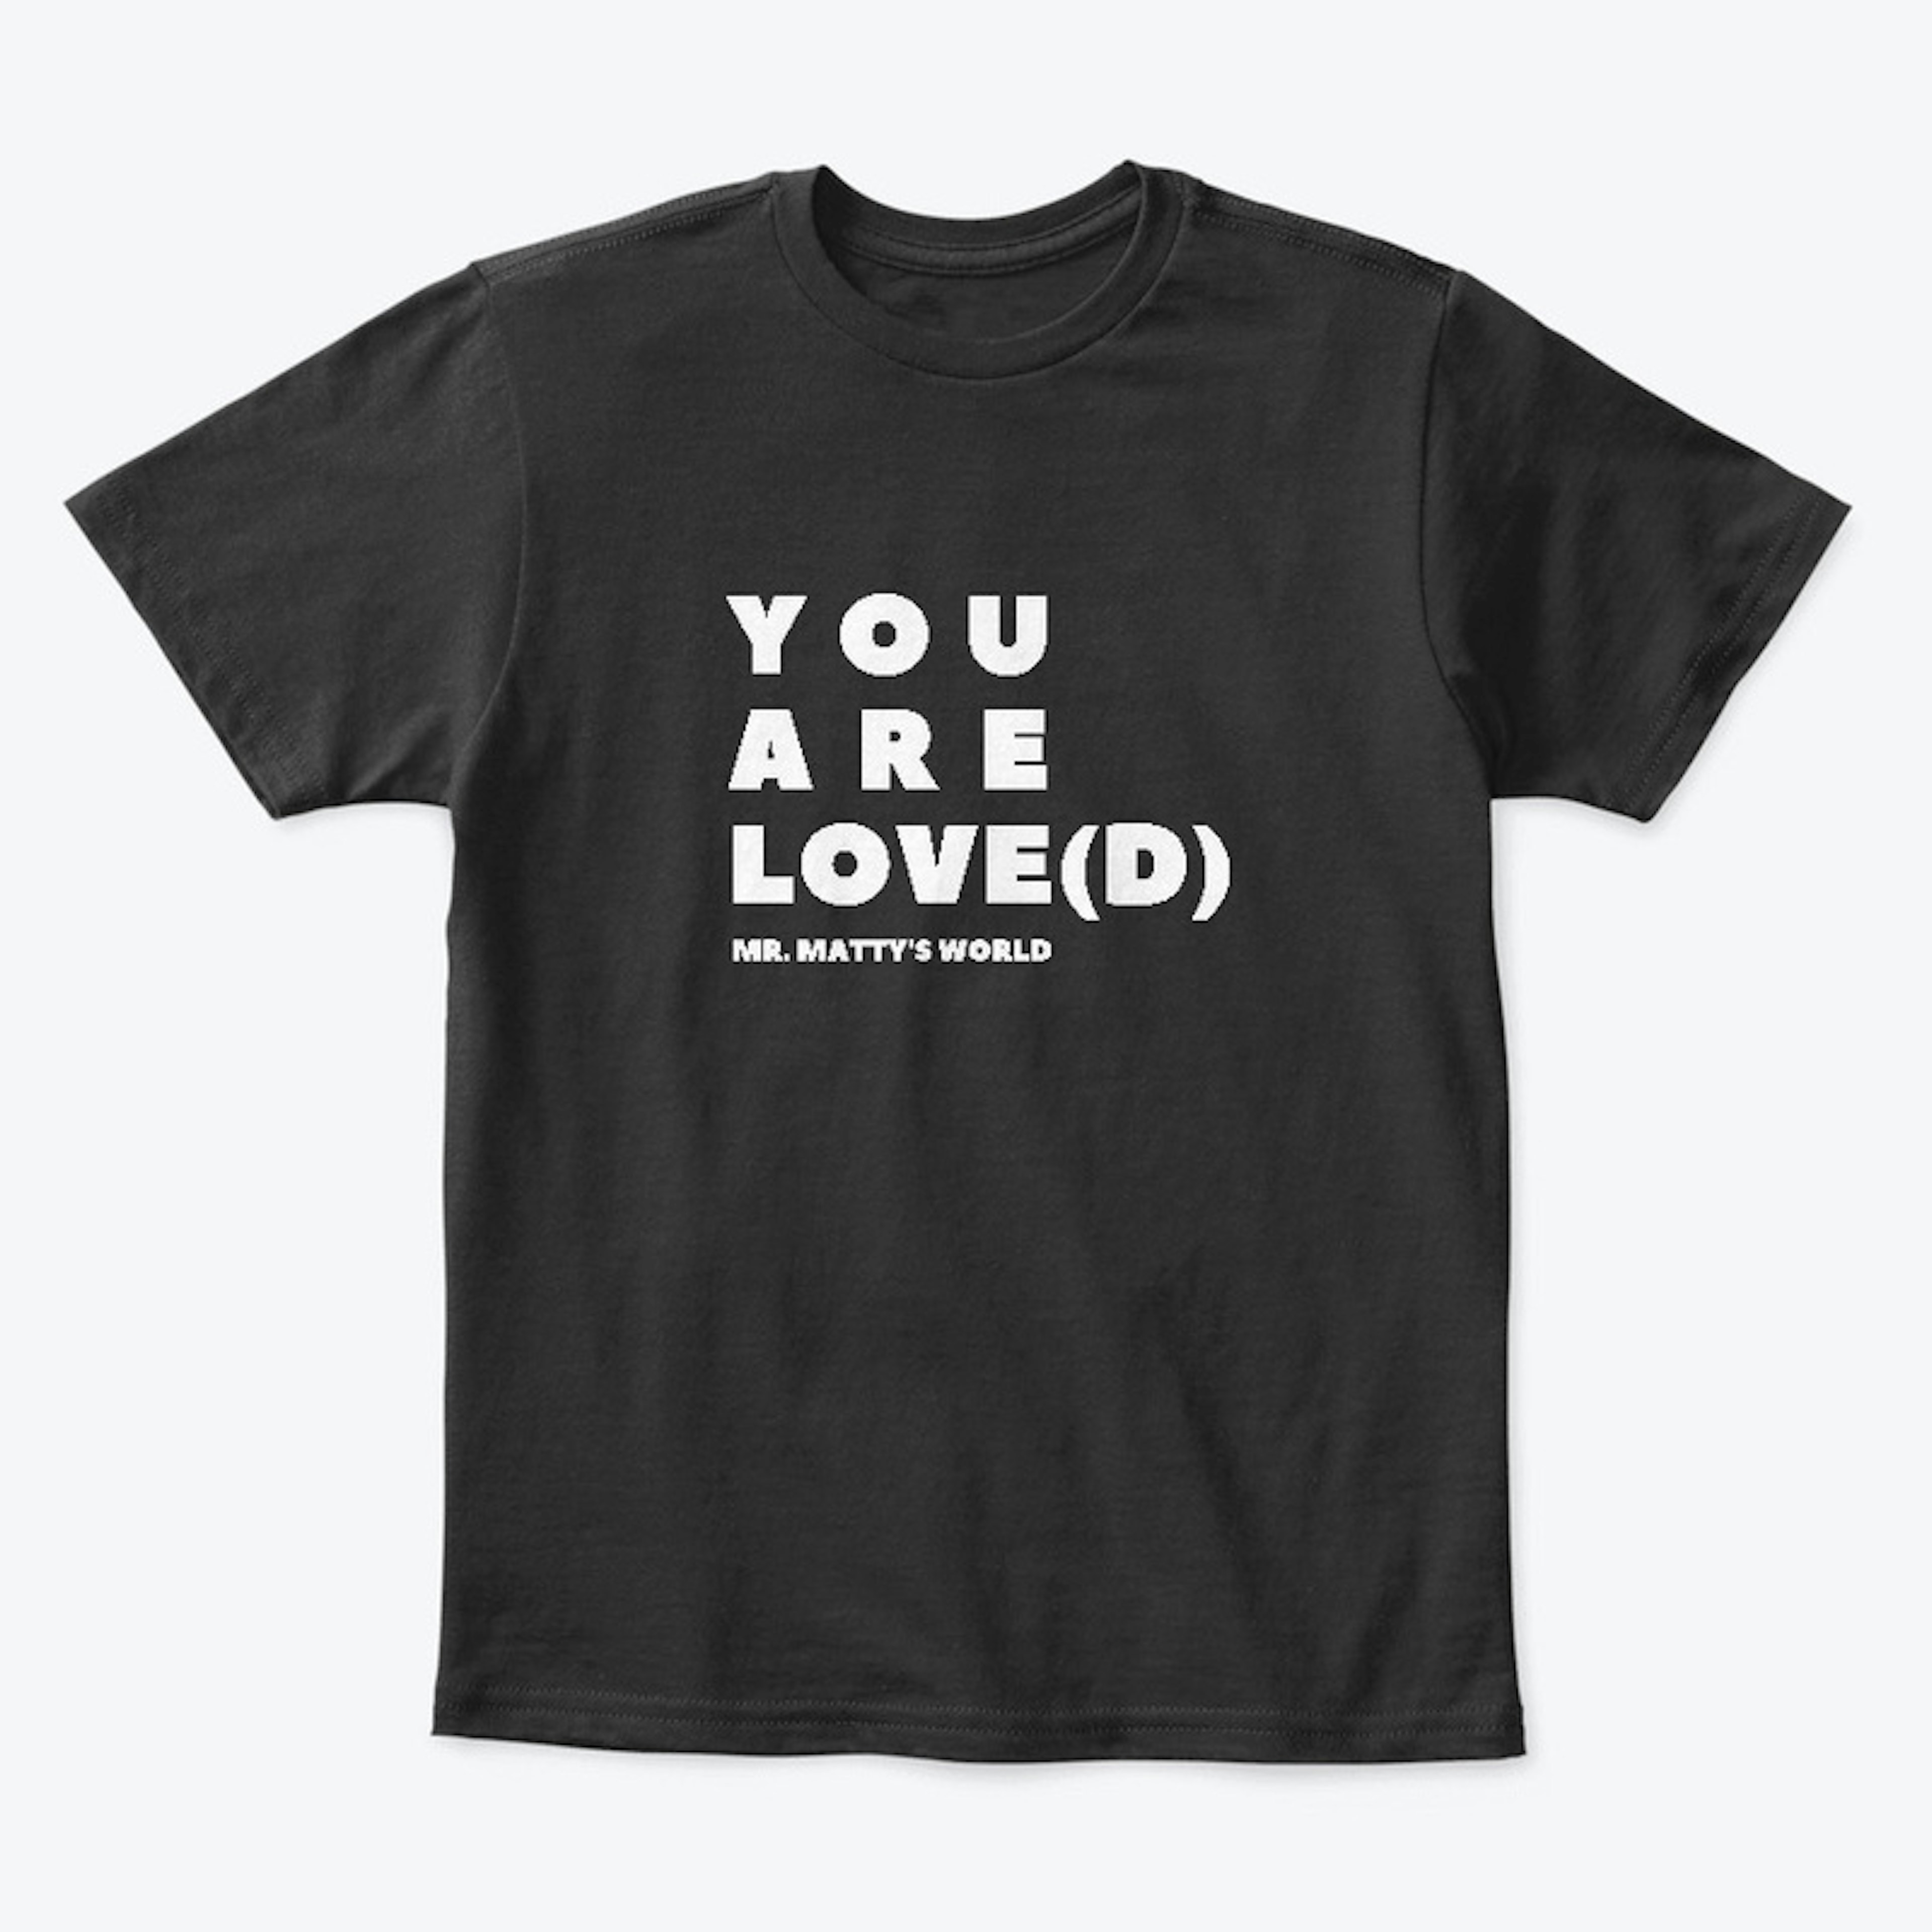 You Are Love(d) - Bold Font